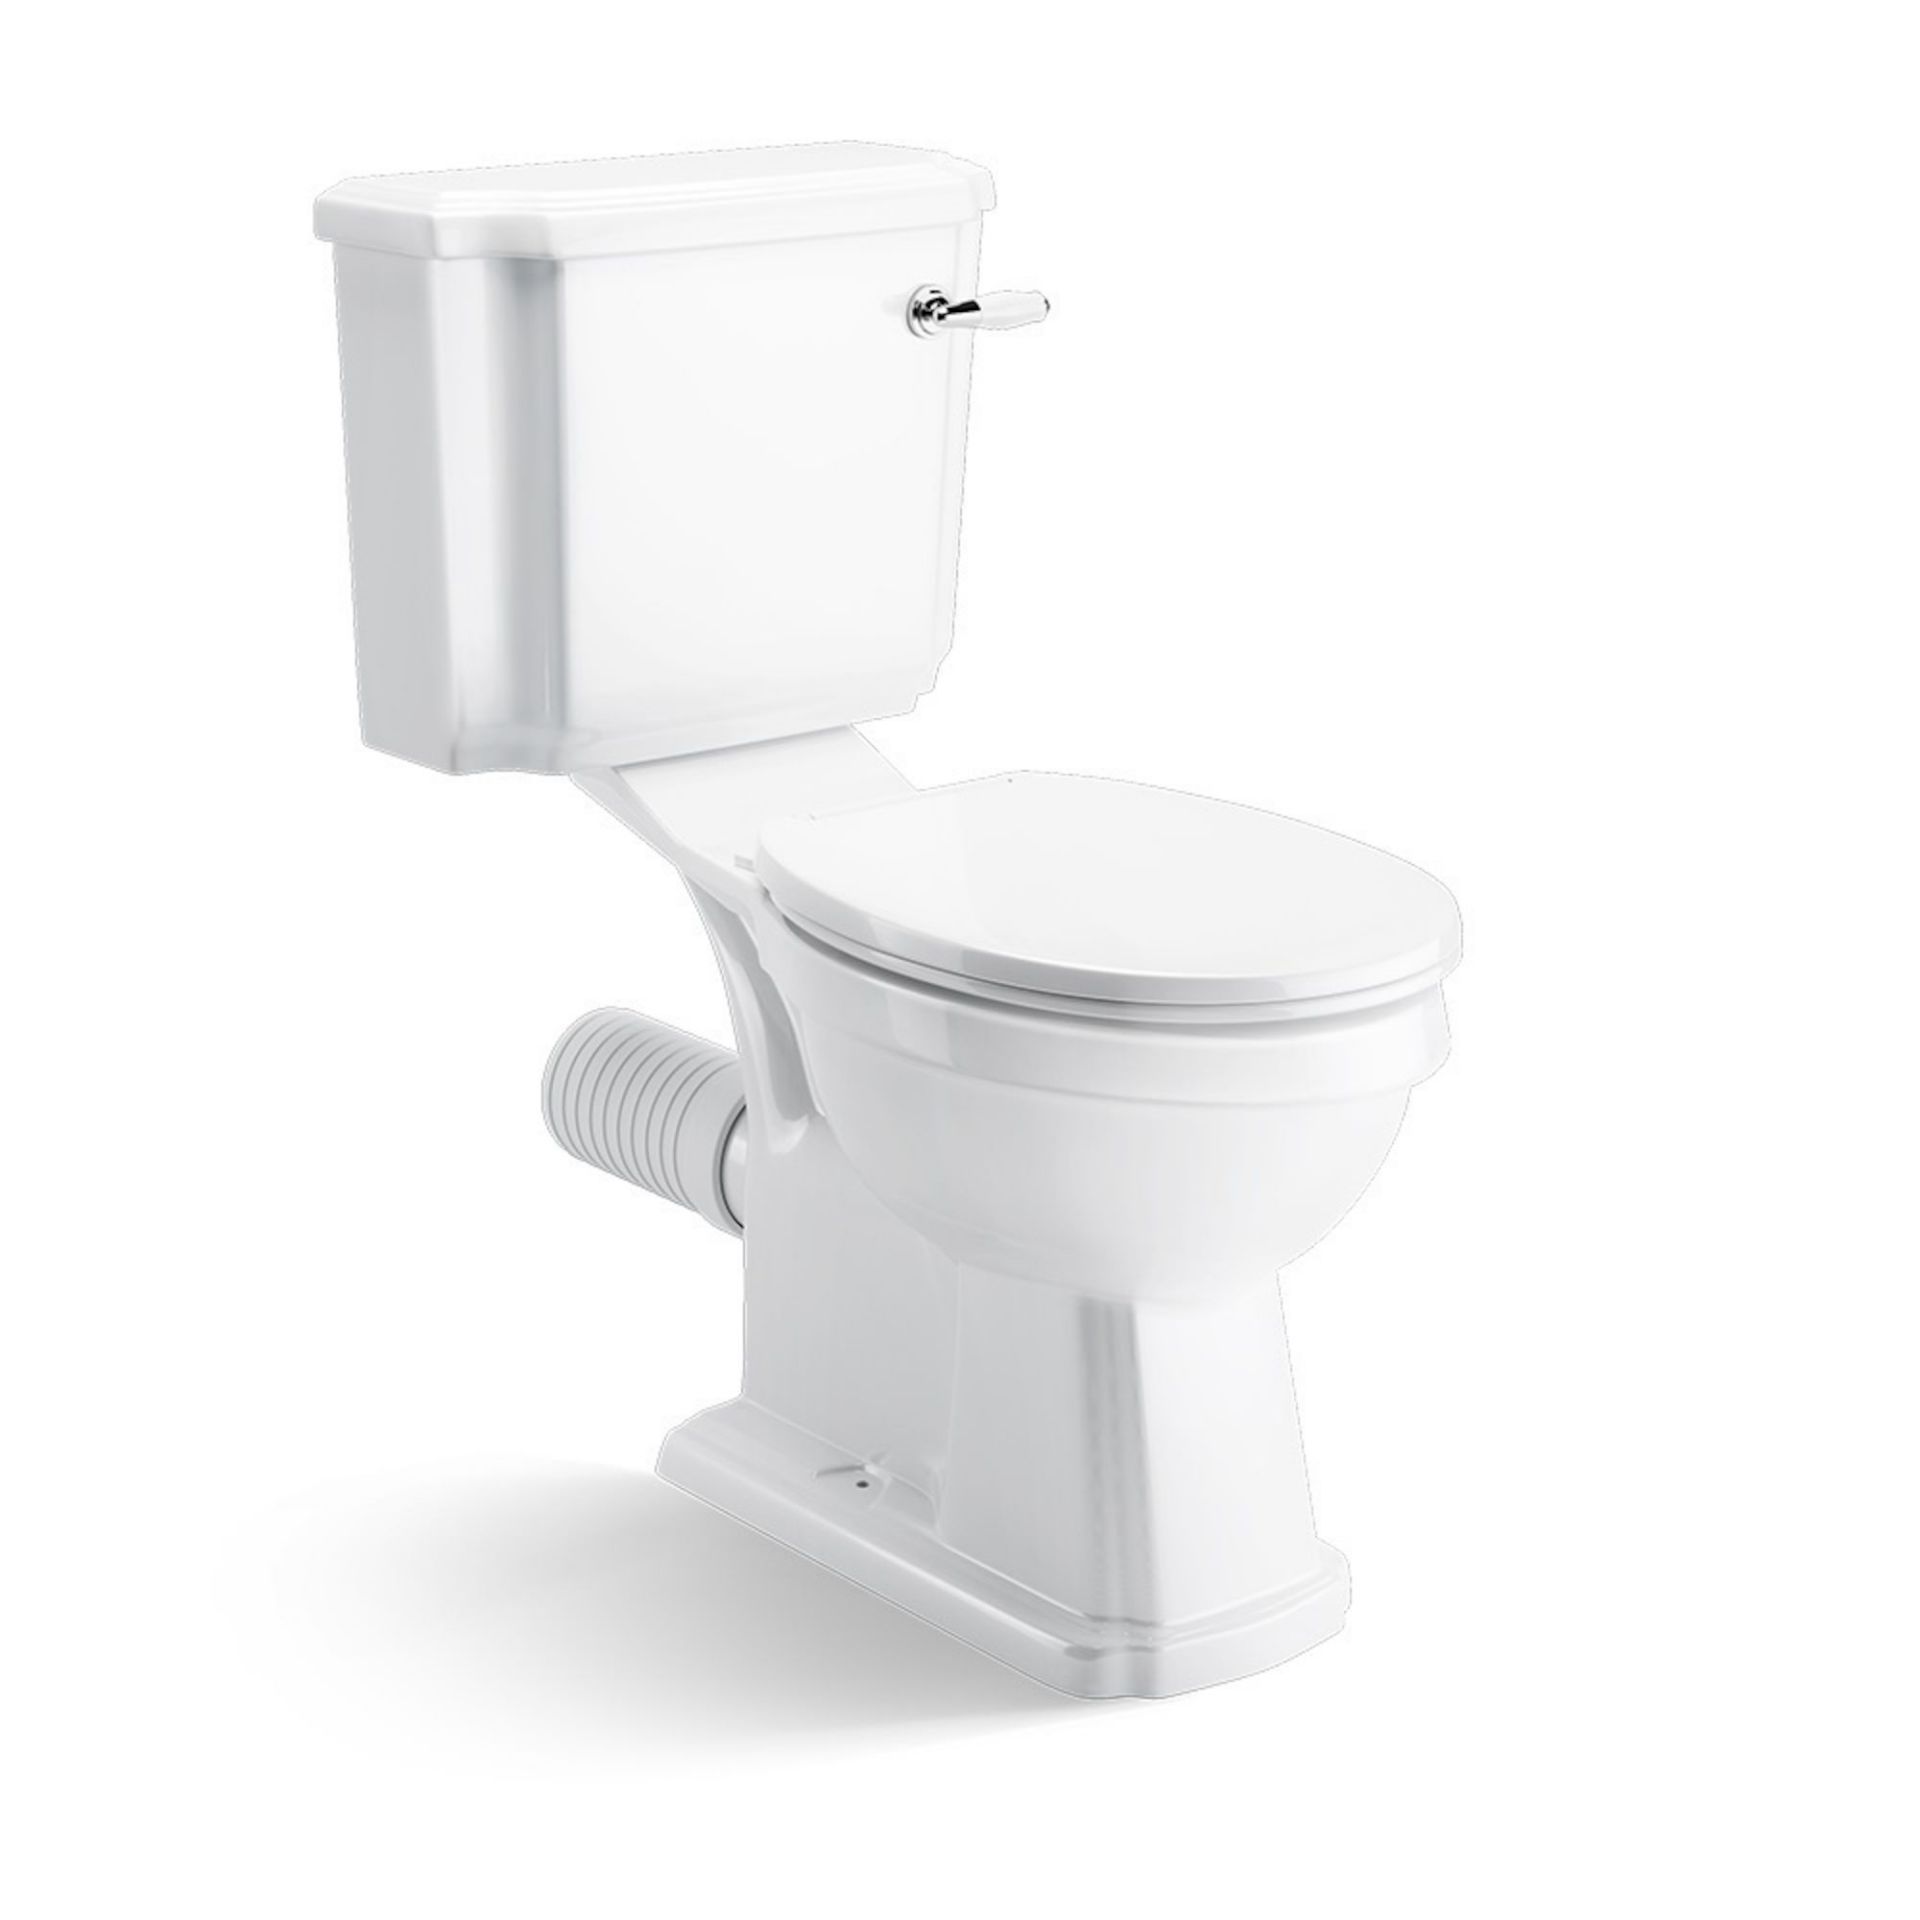 New & Boxed Cambridge Traditional Close Coupled Toilet & Cistern - White Seat. Ccg629Pan.Tradi... - Image 2 of 2